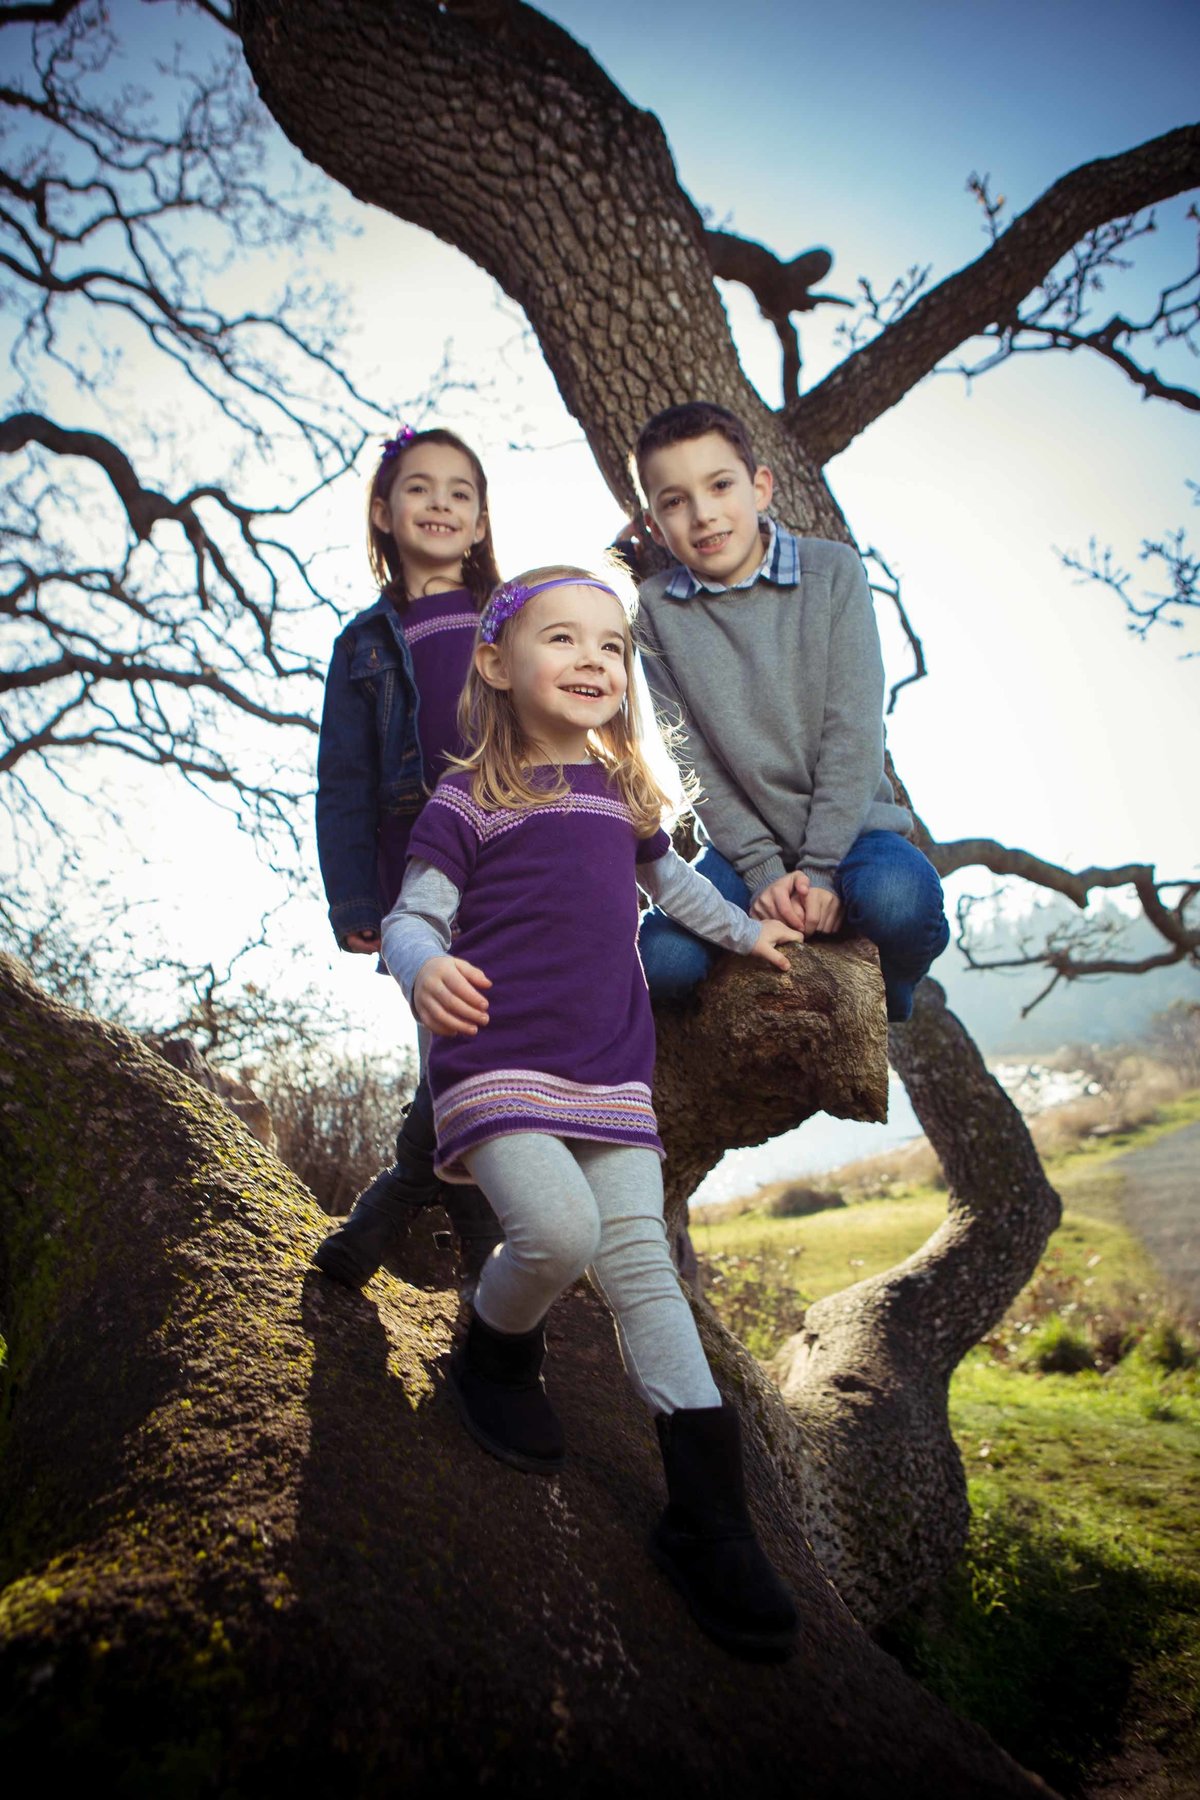 Kids on Tree at Pipers